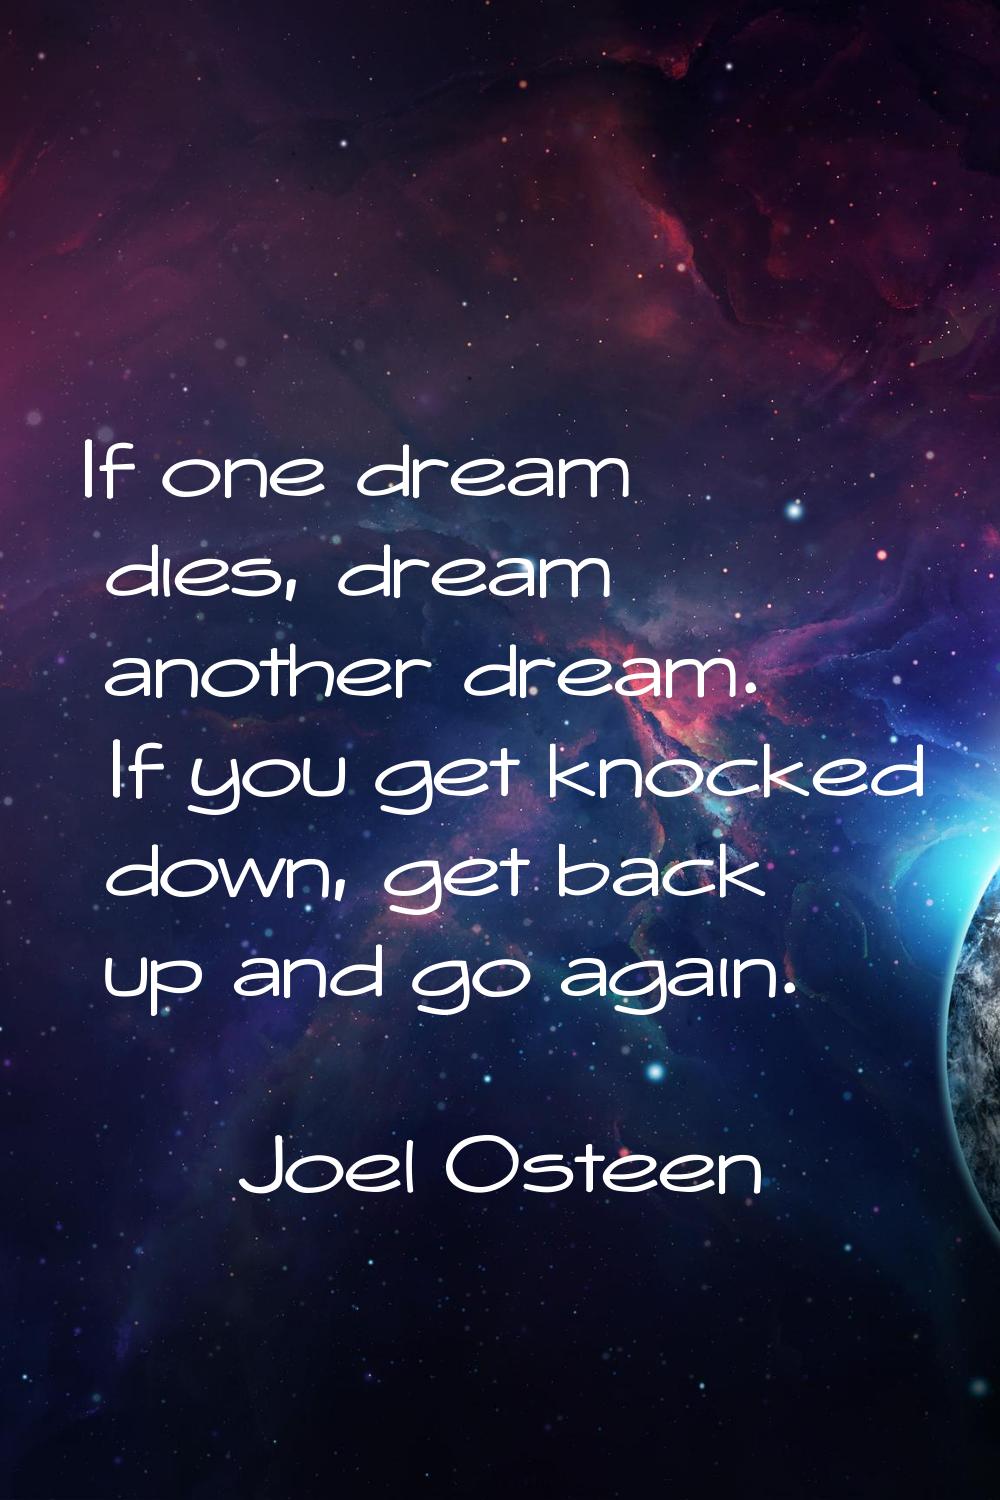 If one dream dies, dream another dream. If you get knocked down, get back up and go again.